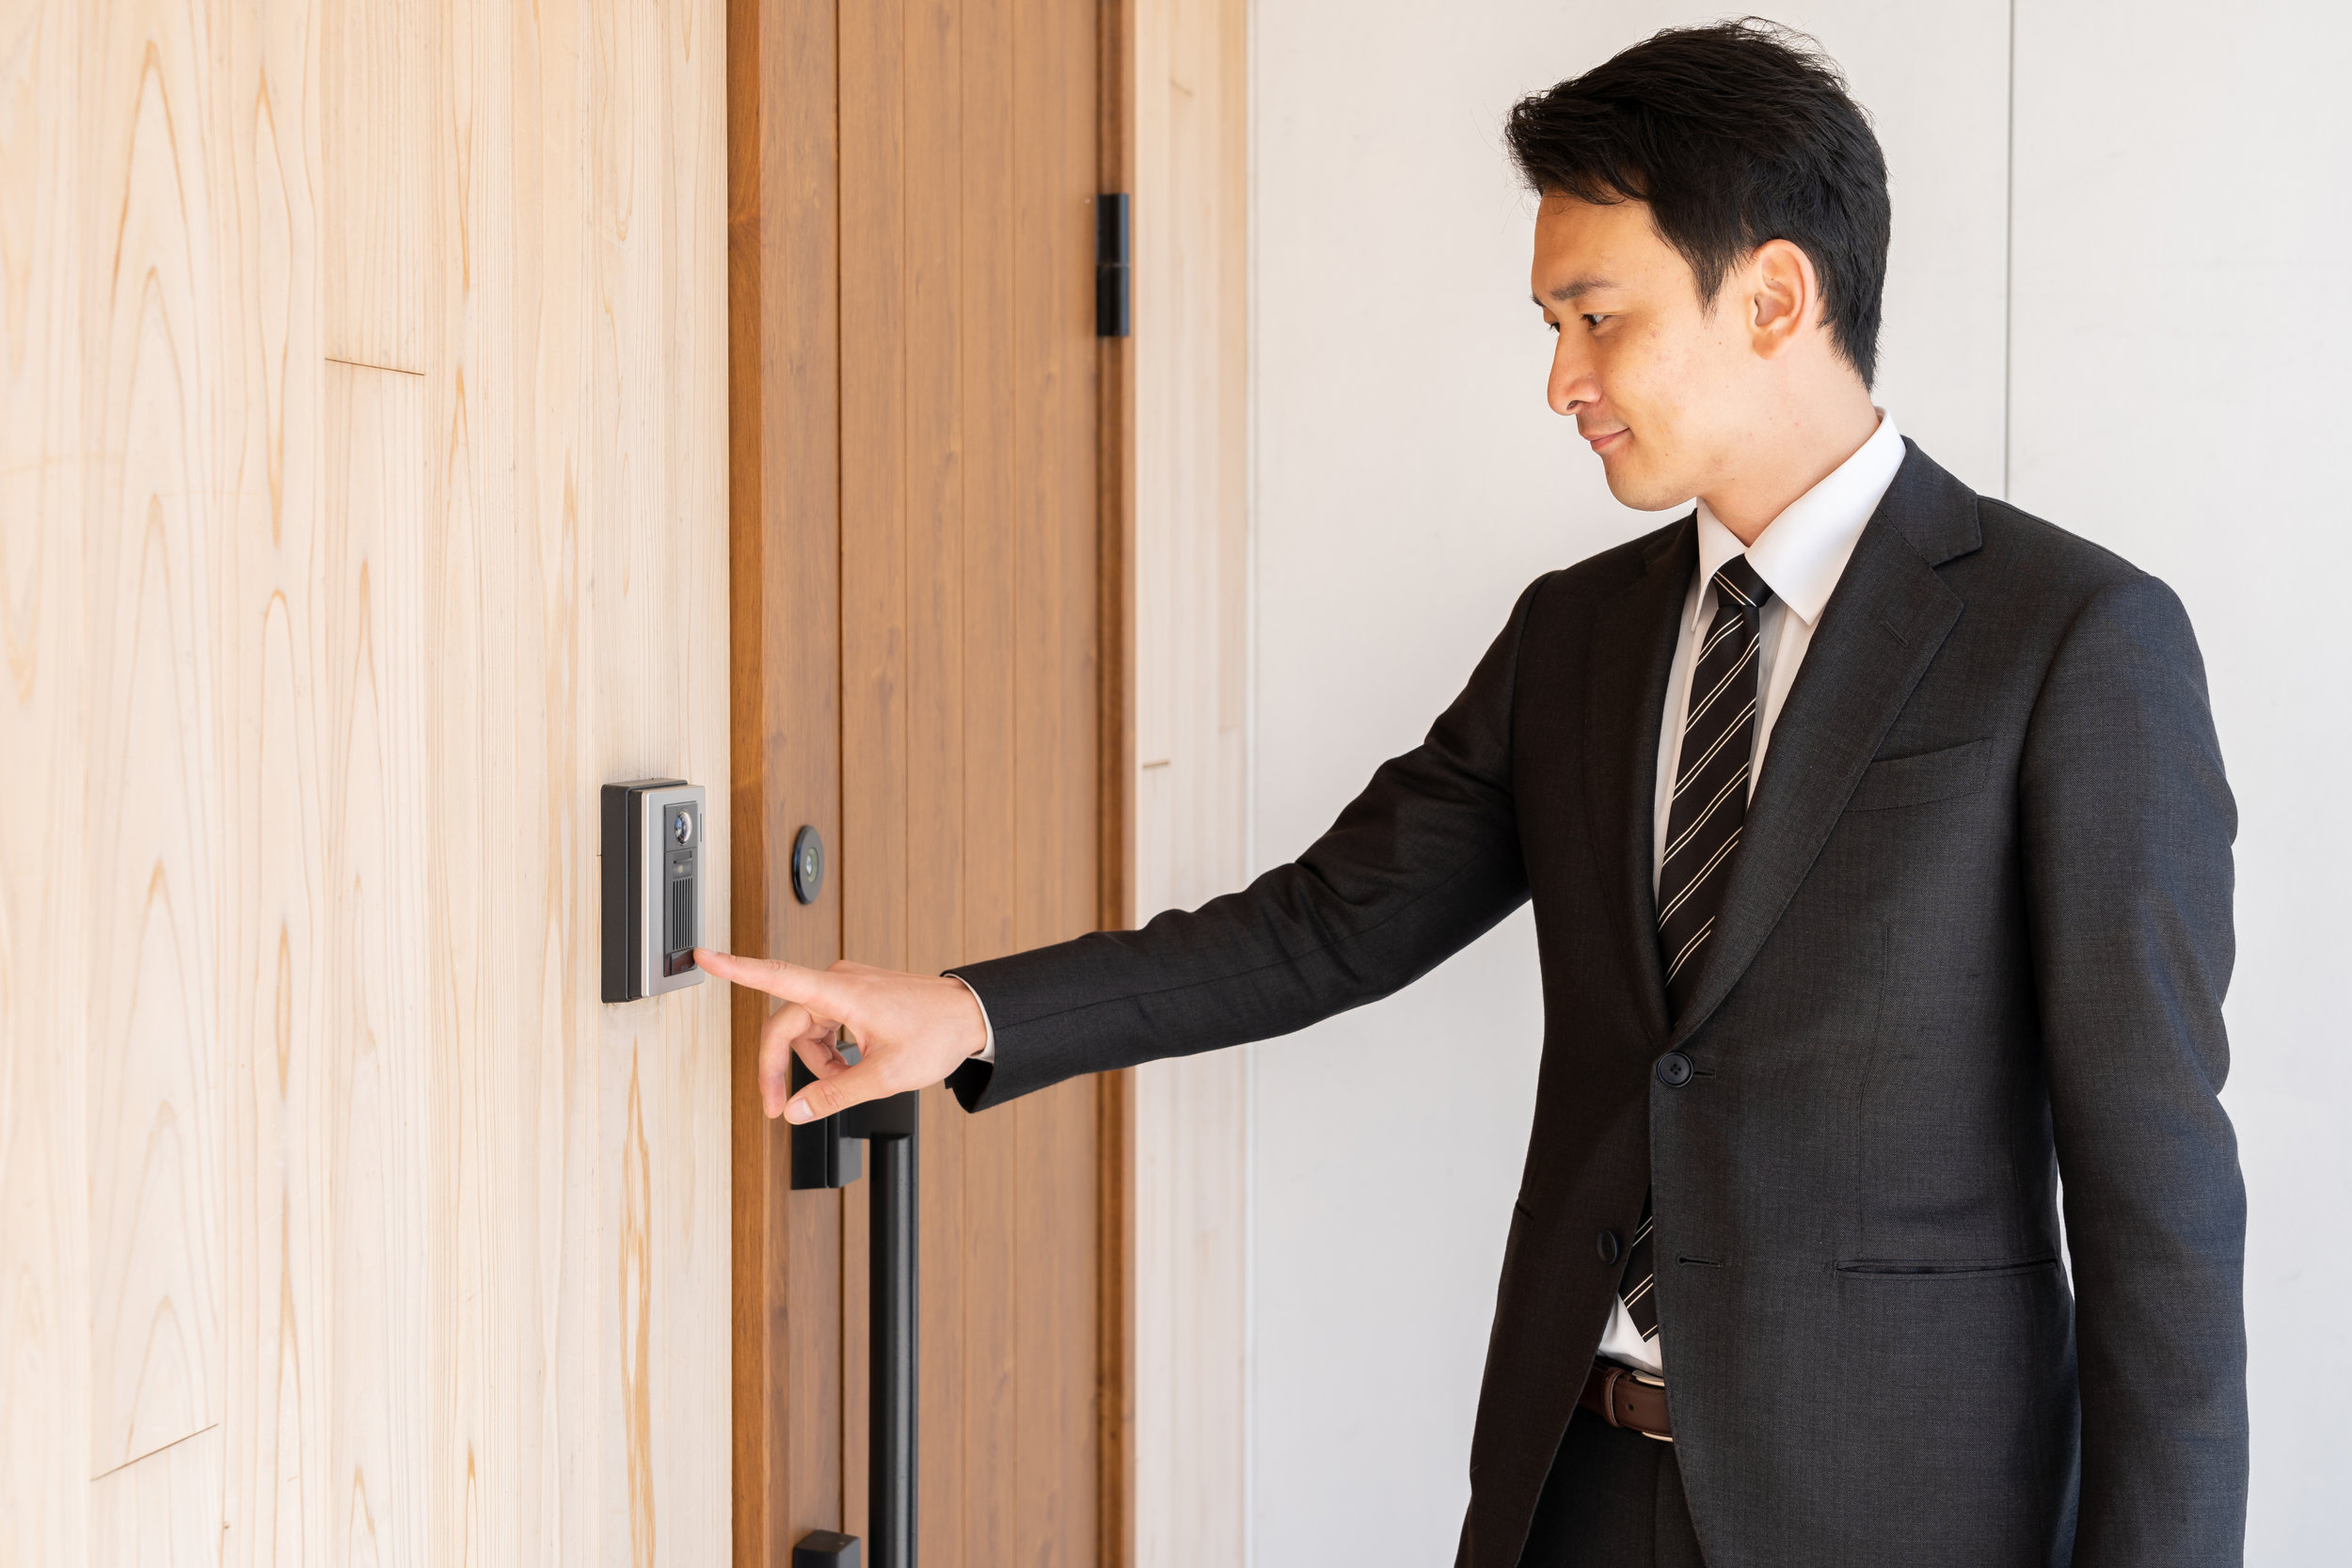 Door Intercoms and Access Control Solutions — The Maynard Group